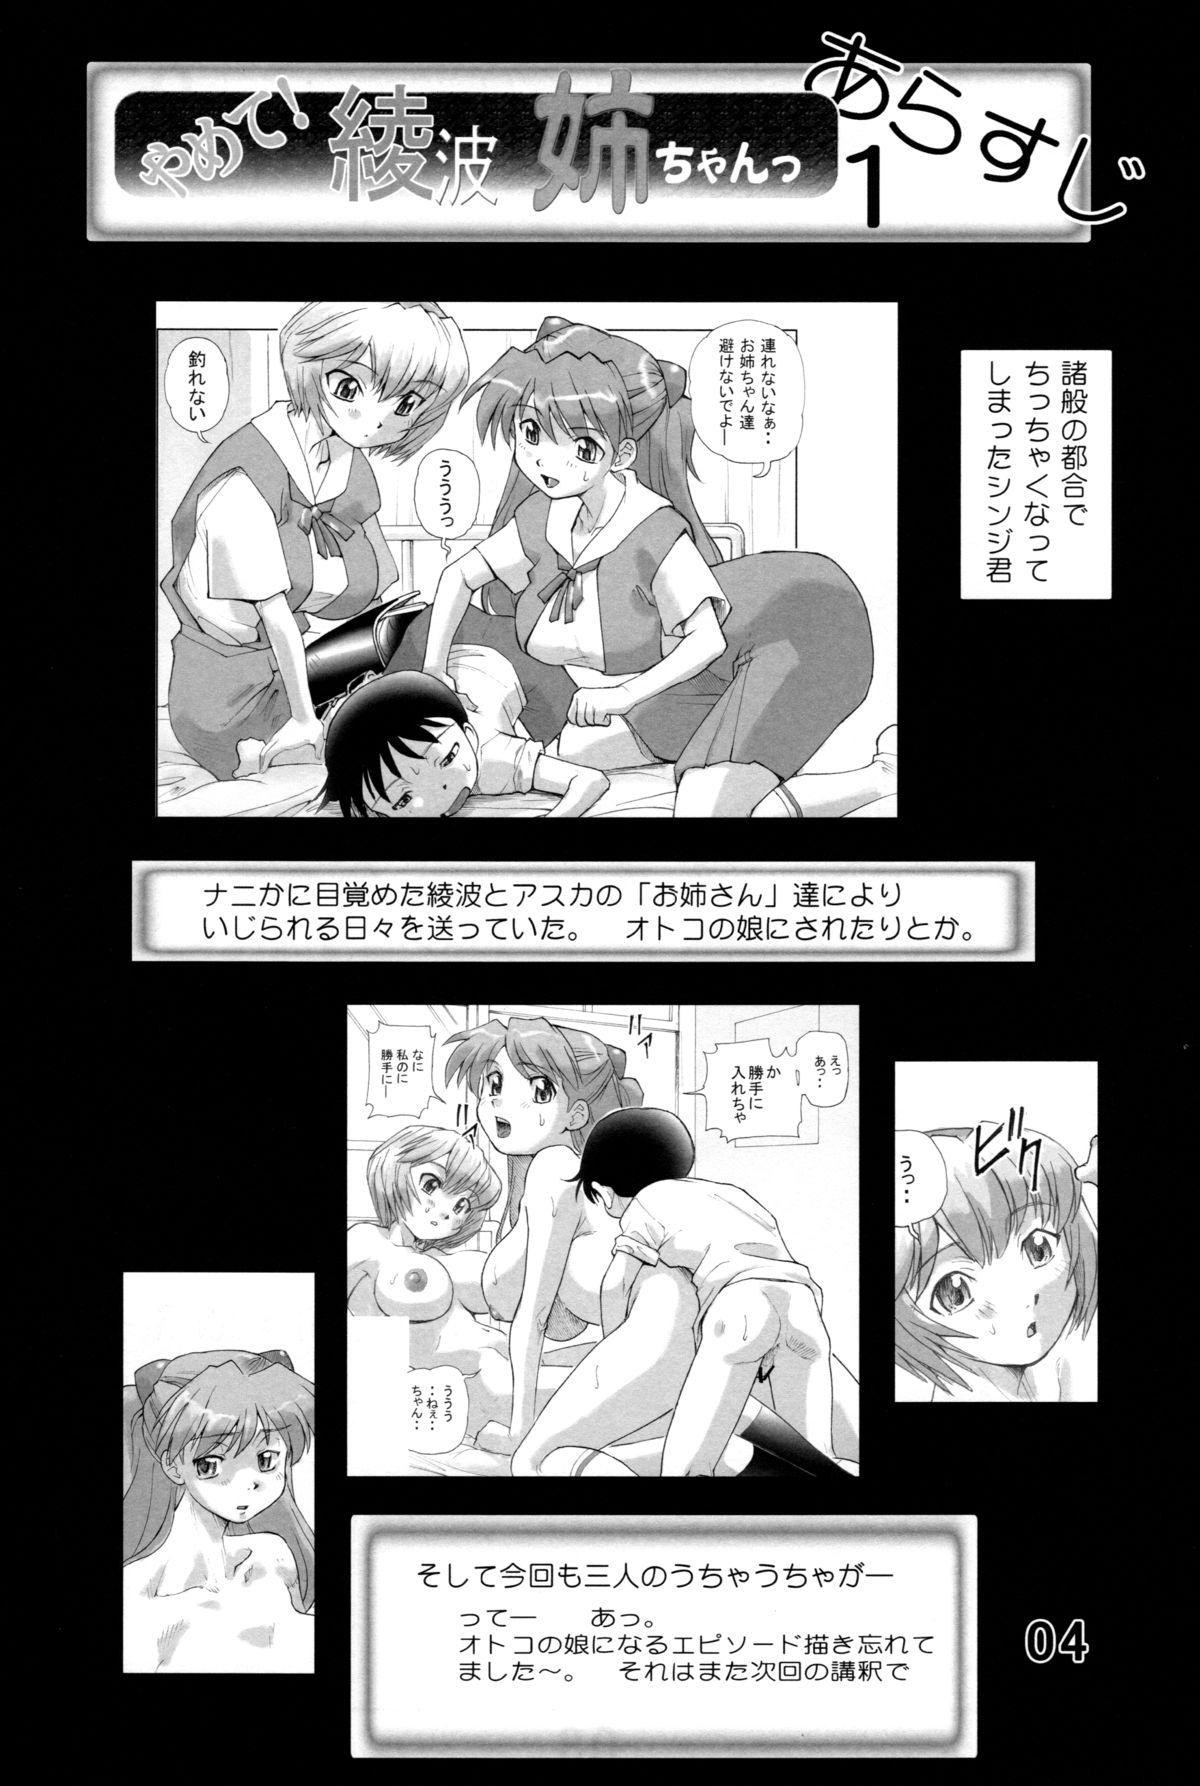 Shemale Sex Yamete! Ayanami Nee-chan 2 - Neon genesis evangelion Soapy Massage - Page 4